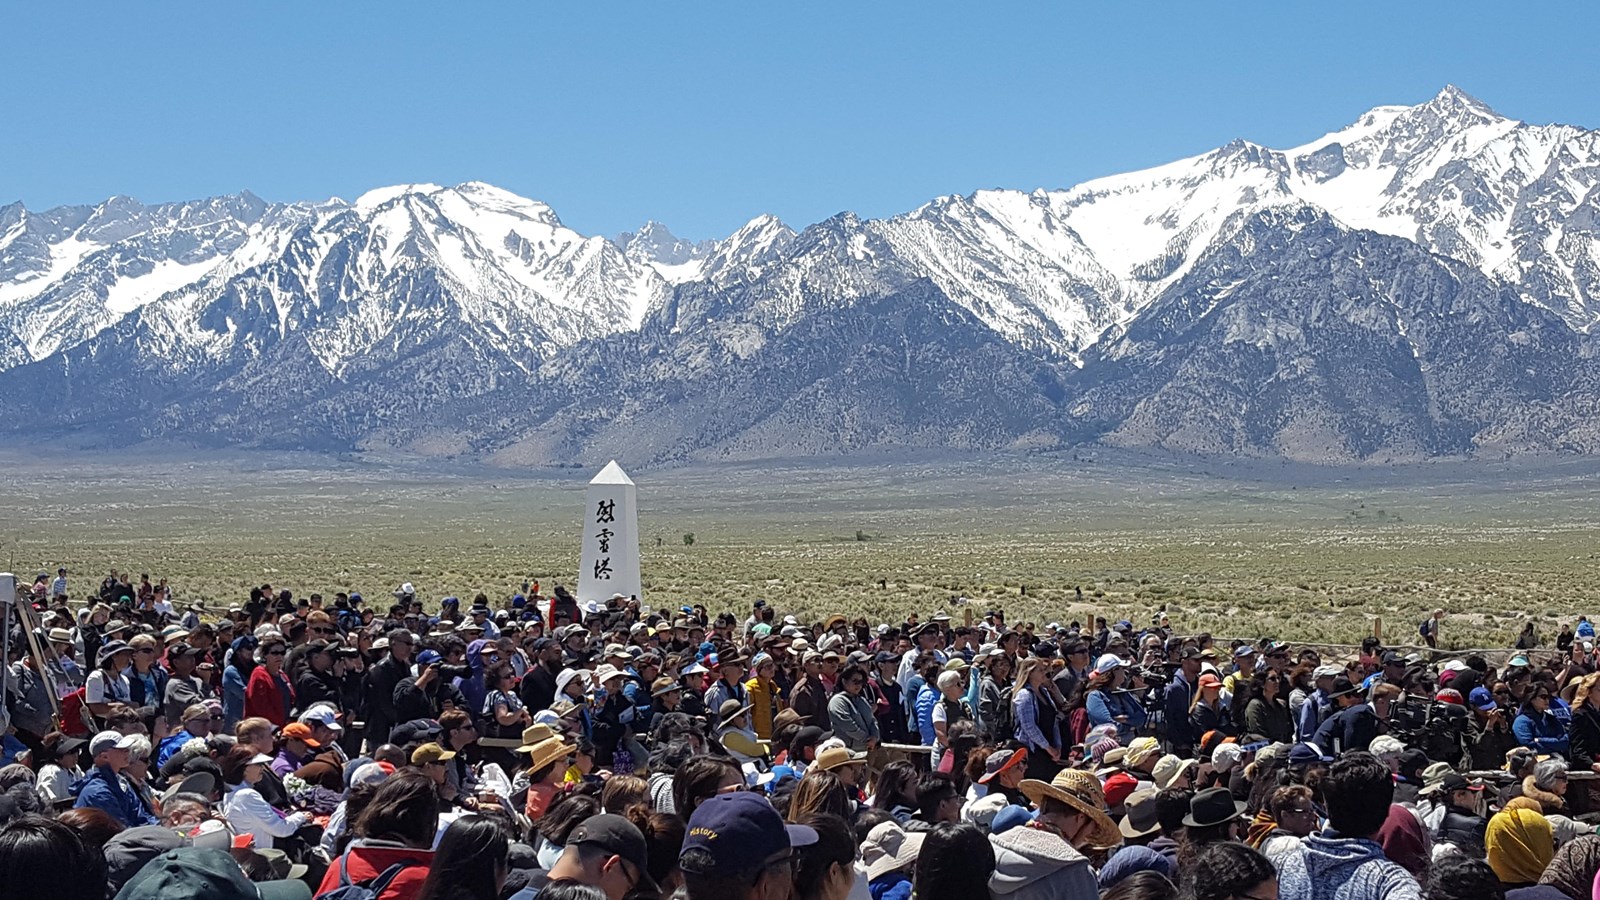 Colorful photo of a large crowd surrounding the Manzanar Cemetery Monument in the sun.